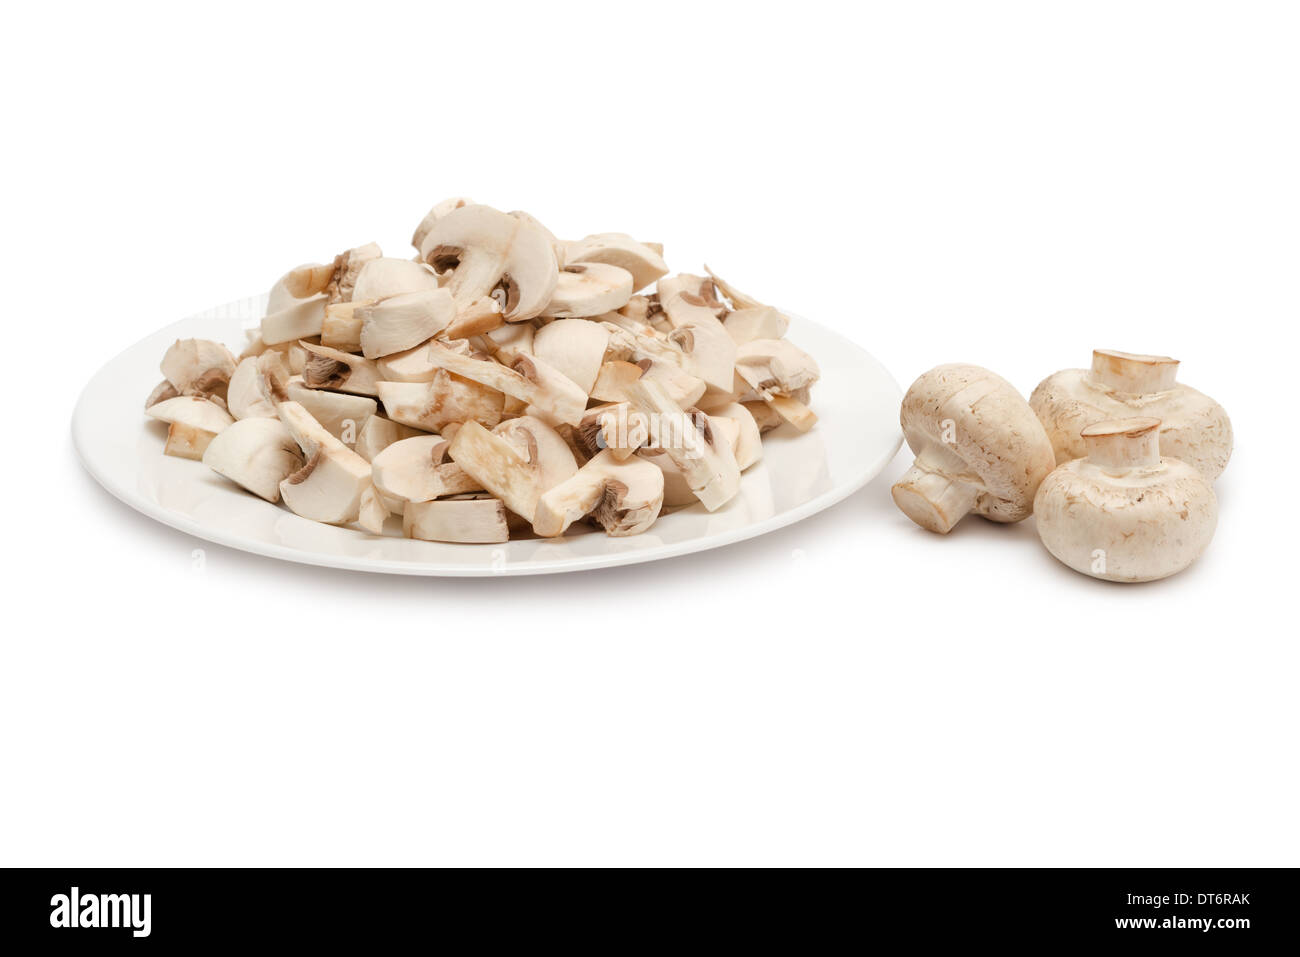 Sliced champignon mushrooms in plate isolated on white background. Side view. Stock Photo